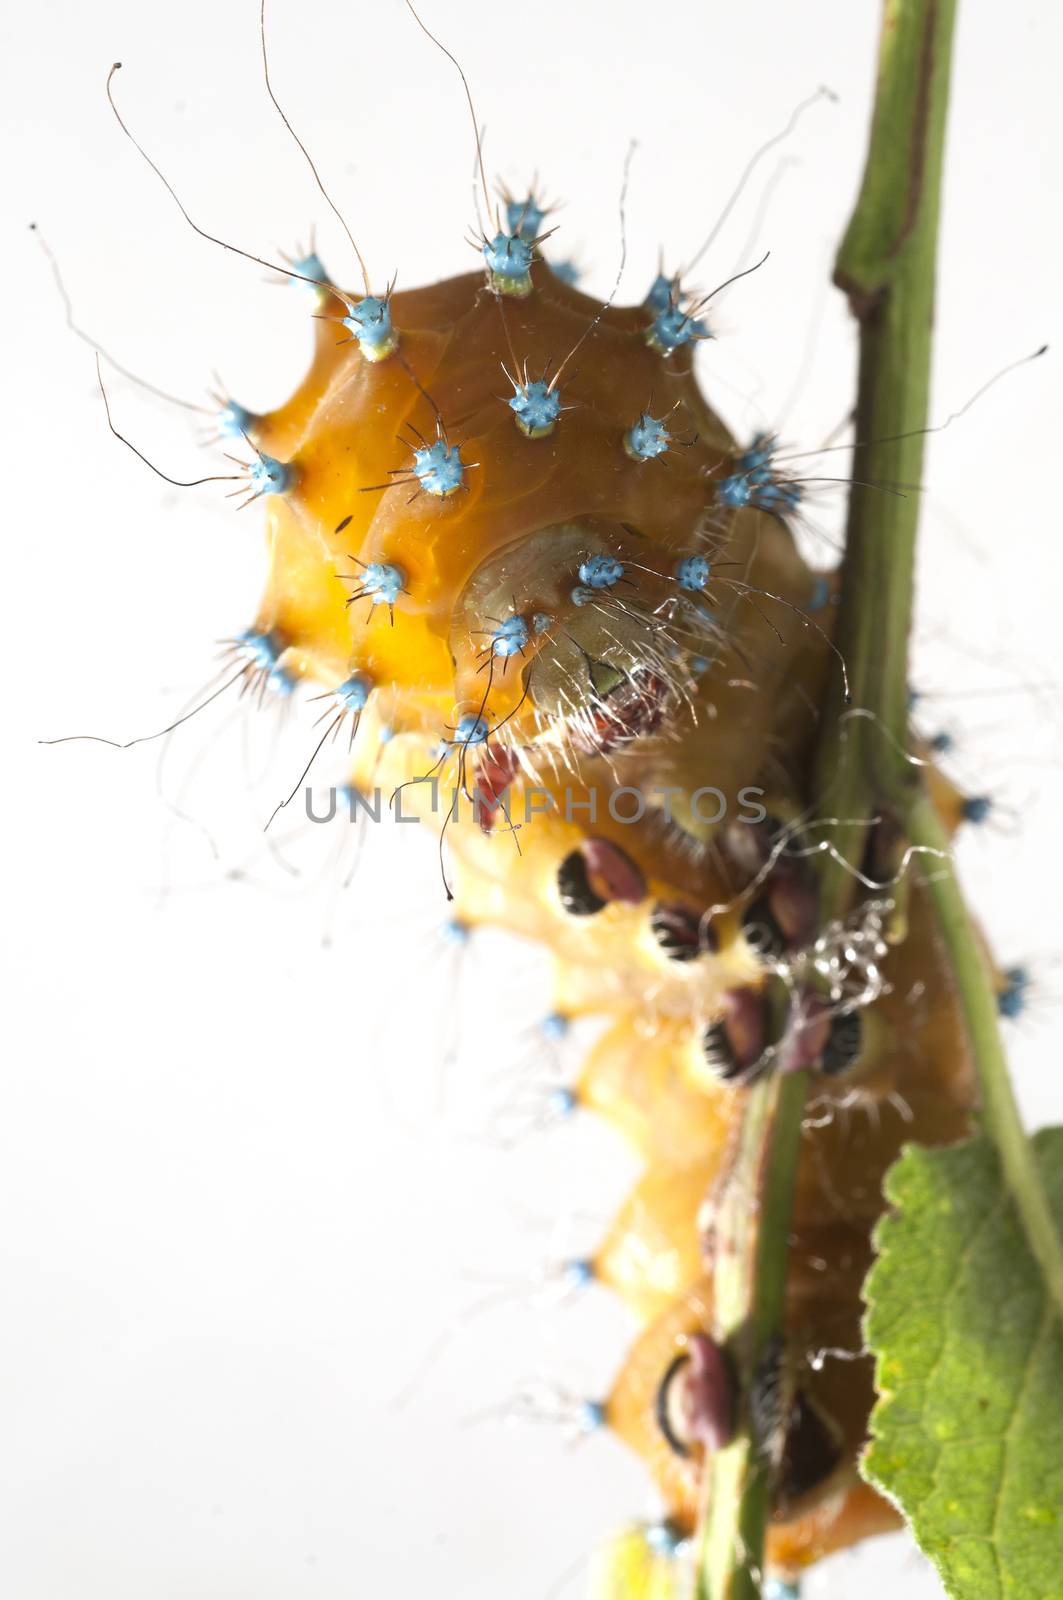 Caterpillar of the Giant Peacock Moth, Saturnia pyri, in front o by jalonsohu@gmail.com